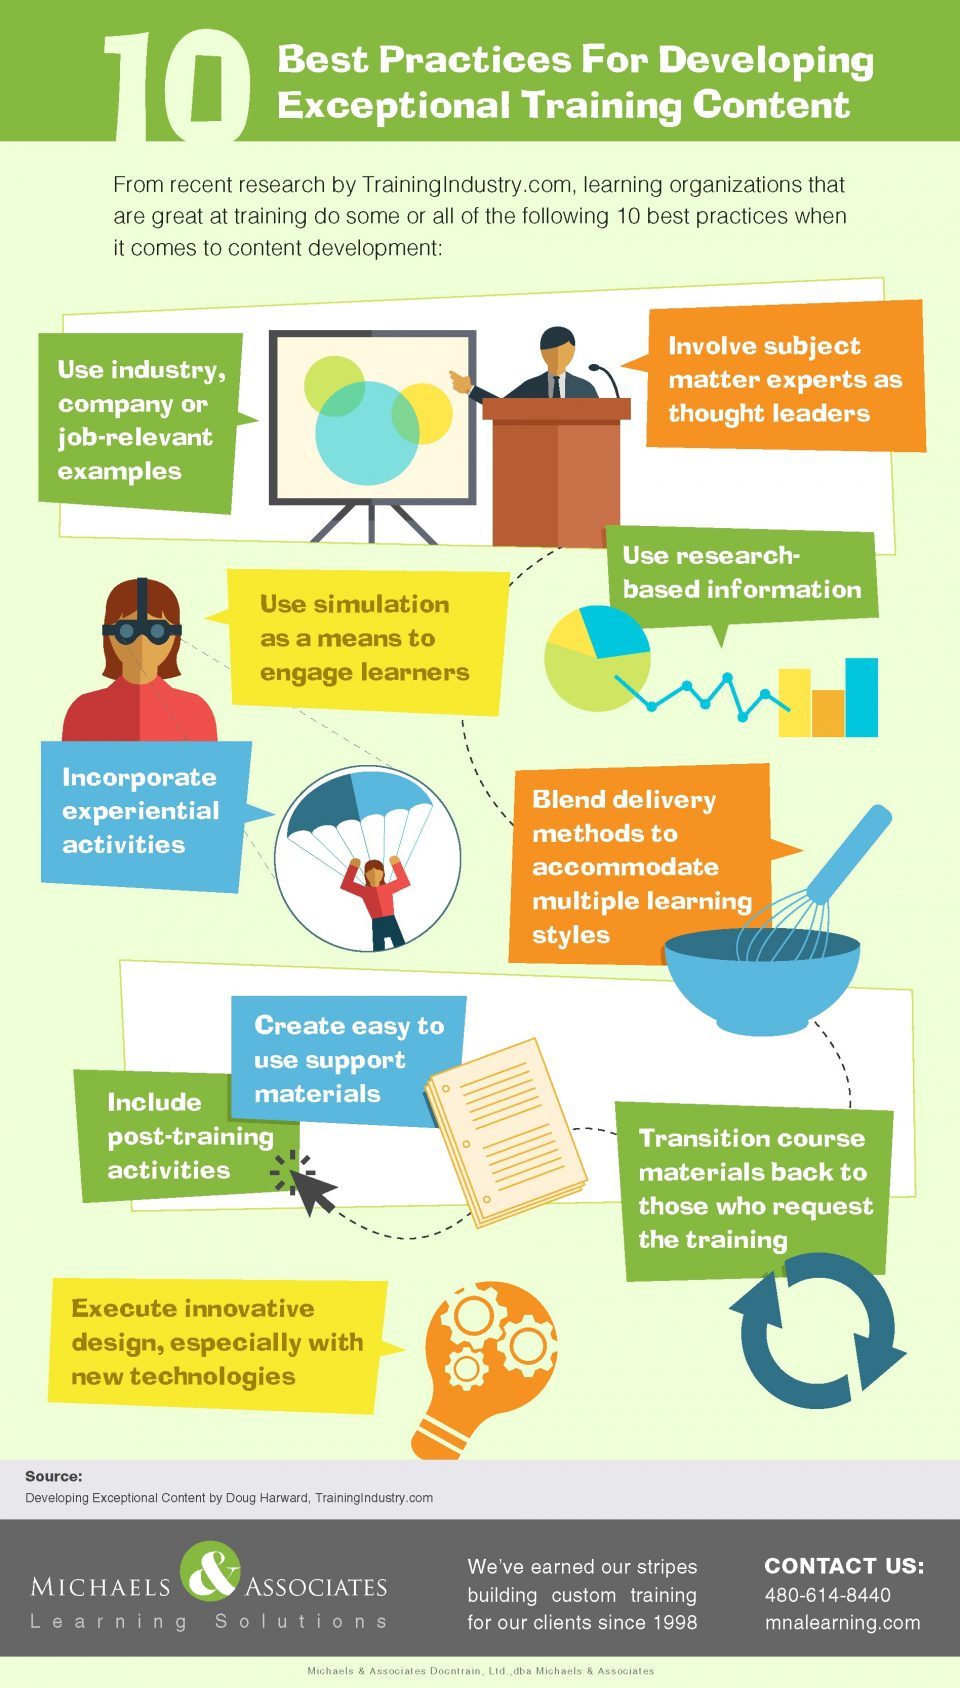 10 Best Practices to Design and Develop Exceptional Training Content Infographic